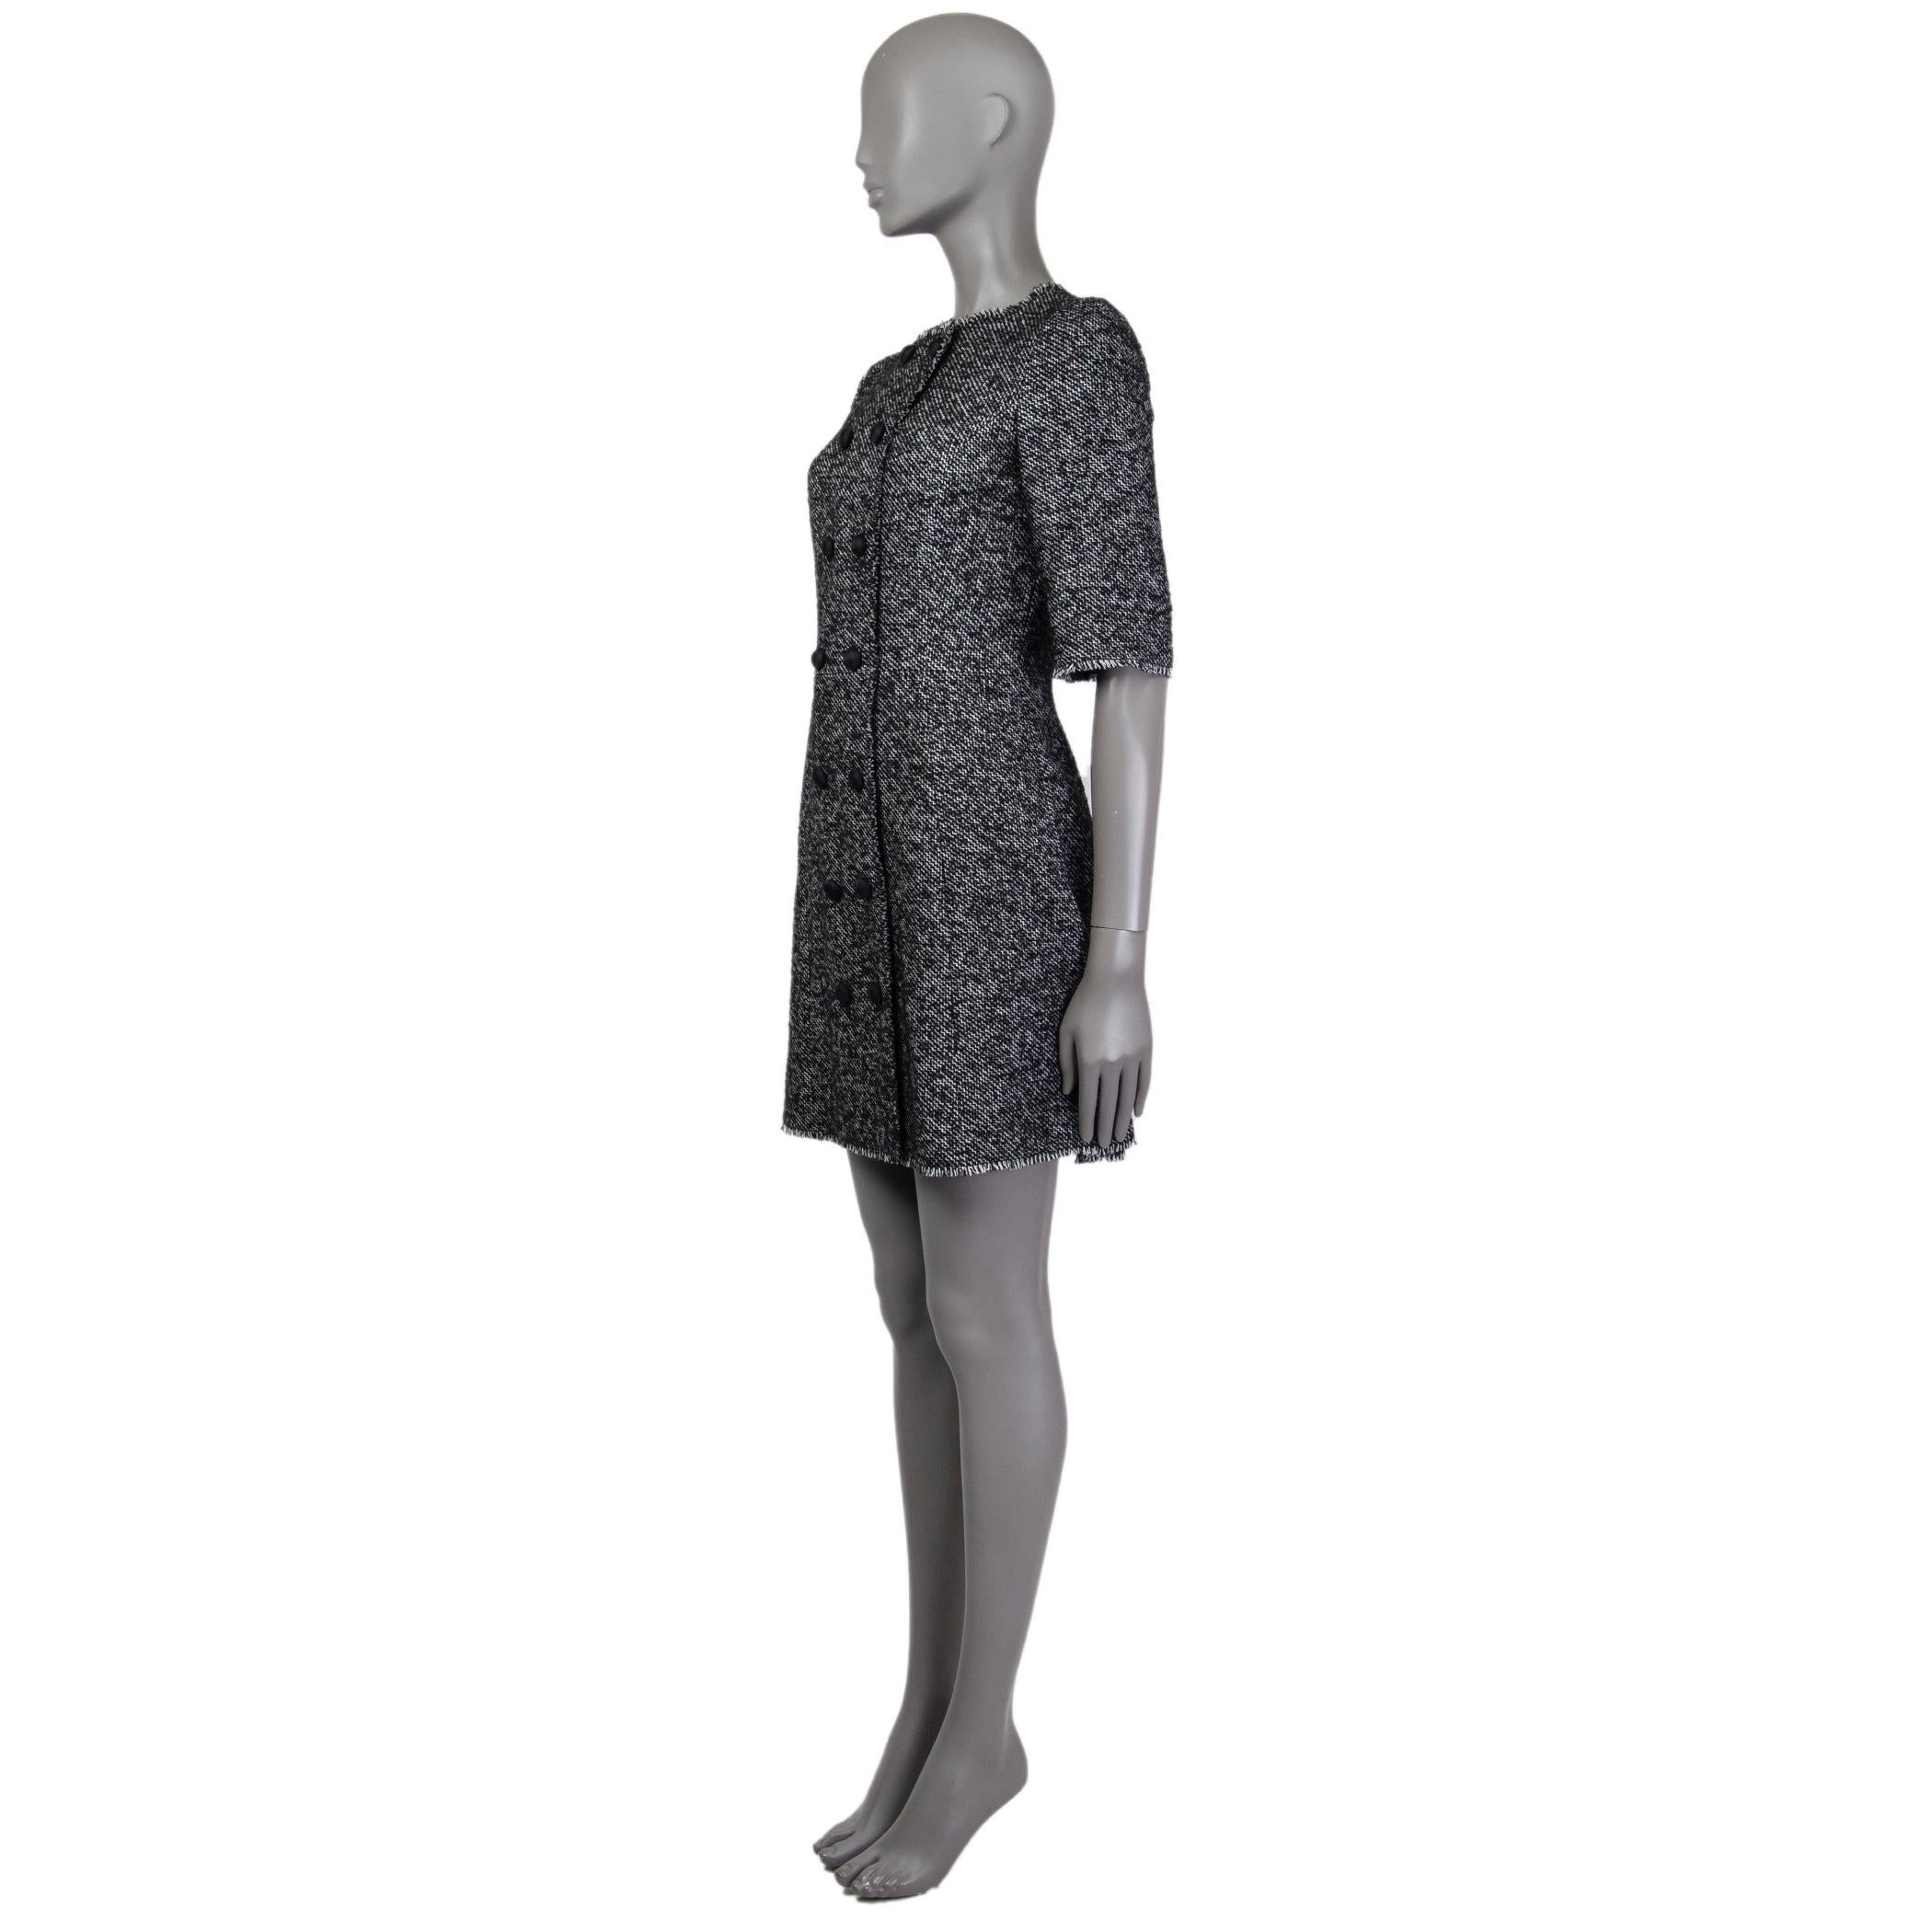 Dolce & Gabbana double-breasted tweed dress in black and white acrylic (49%), polyester (25%), wool (20%), other (4%), and nylon (2%). With crew neck, 3/4 sleeves, decorative fabric-lined buttons on the front, and fringed trims. Closes with